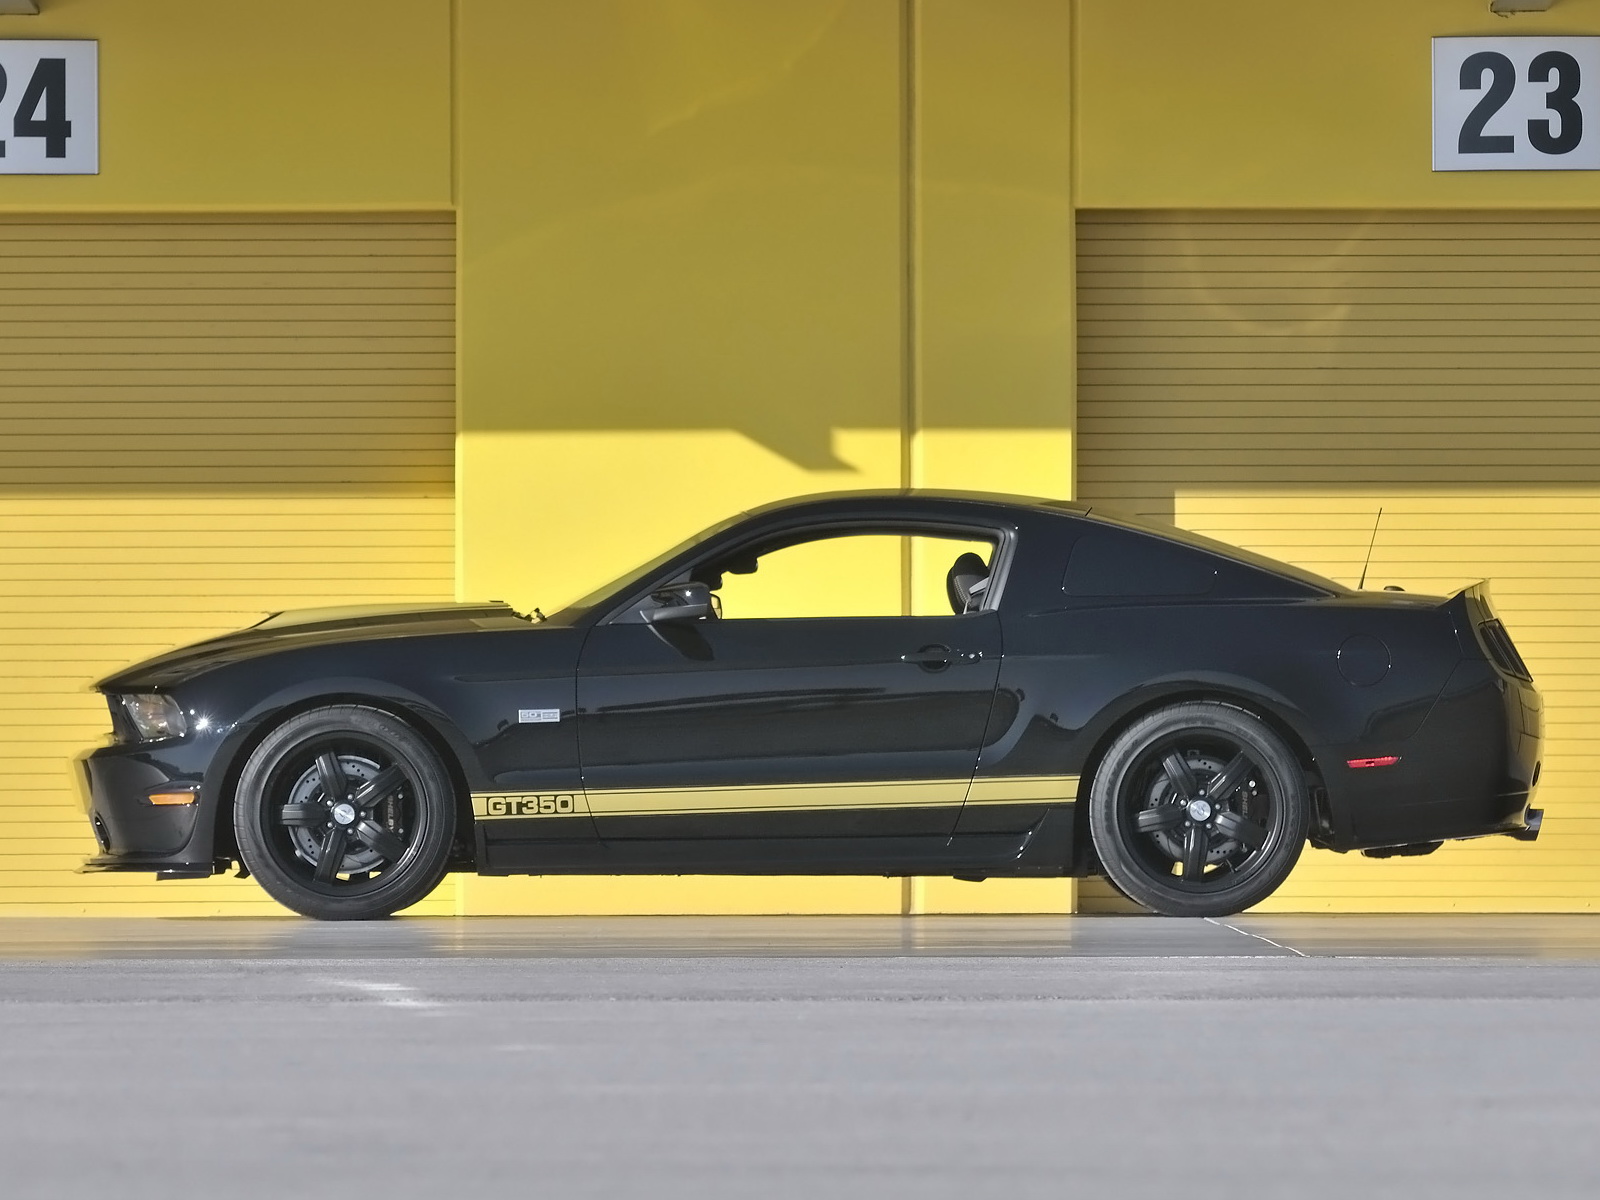 2012, Shelby, Gt350, Ford, Mustang, Muscle Wallpaper